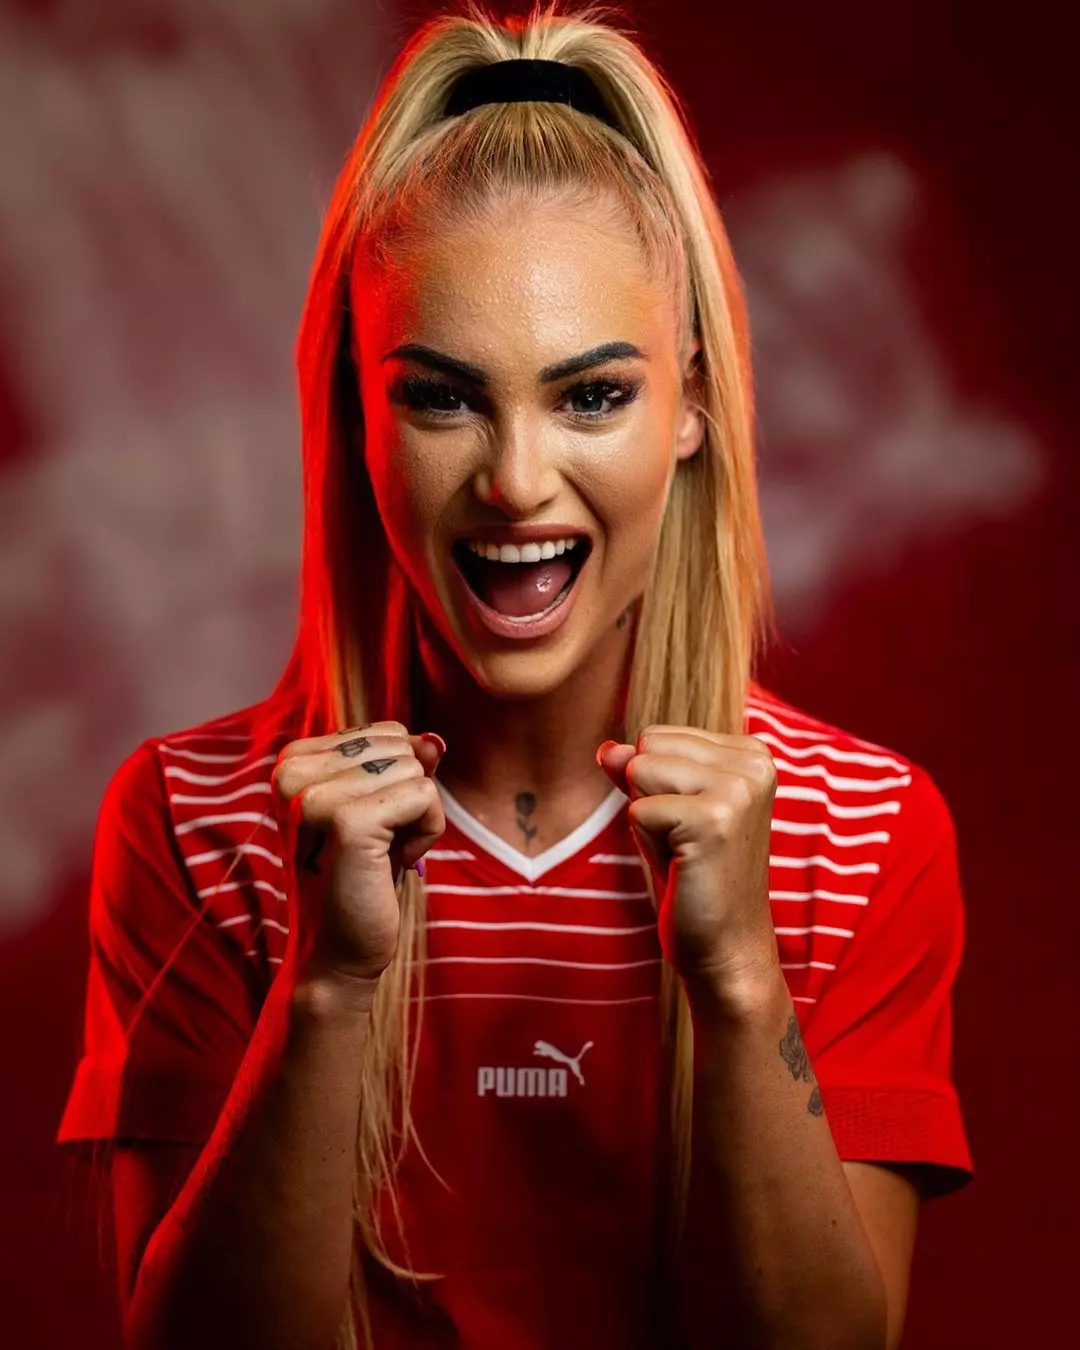 Alisha Lehmann is one of the most beautiful female footballers at the 2023 FIFA World Cup